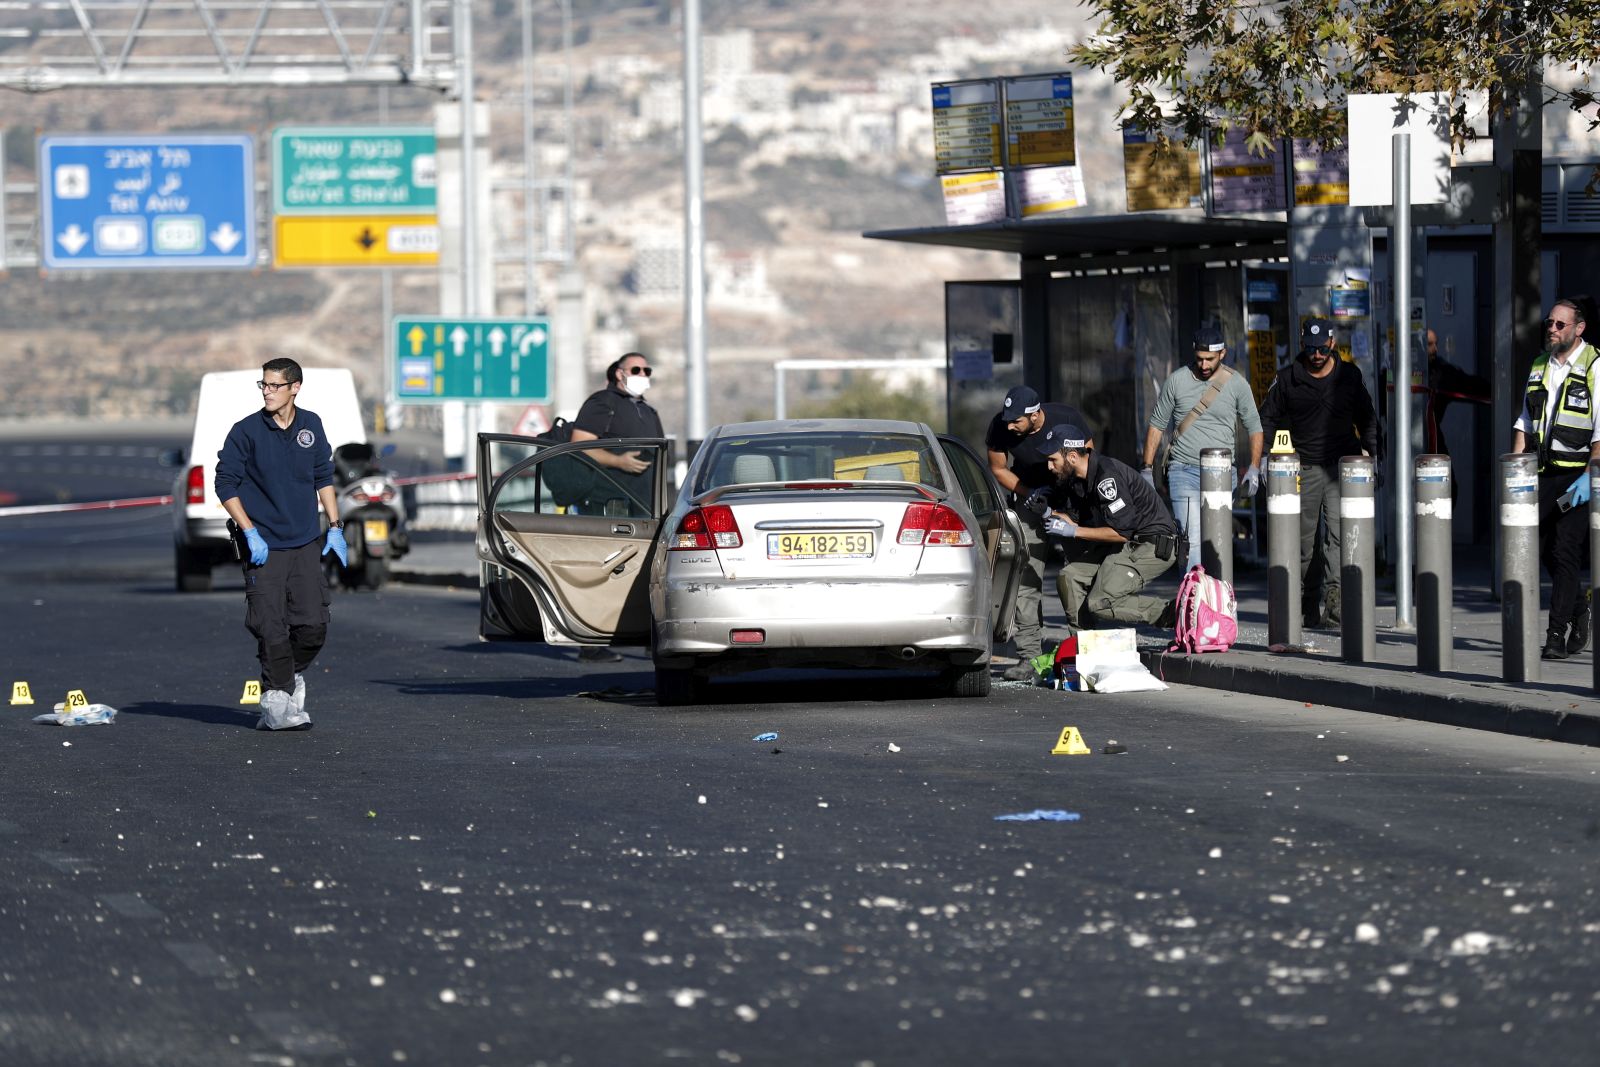 epa10321718 Israeli security forces stand at site of explosion at a bus stop near entrance to Jerusalem, Israel, 23 November 2022. According to Israeli police, at least 12 people were injured in two explosions at two bus stops near entrances to Jerusalem.  EPA/ATEF SAFADI